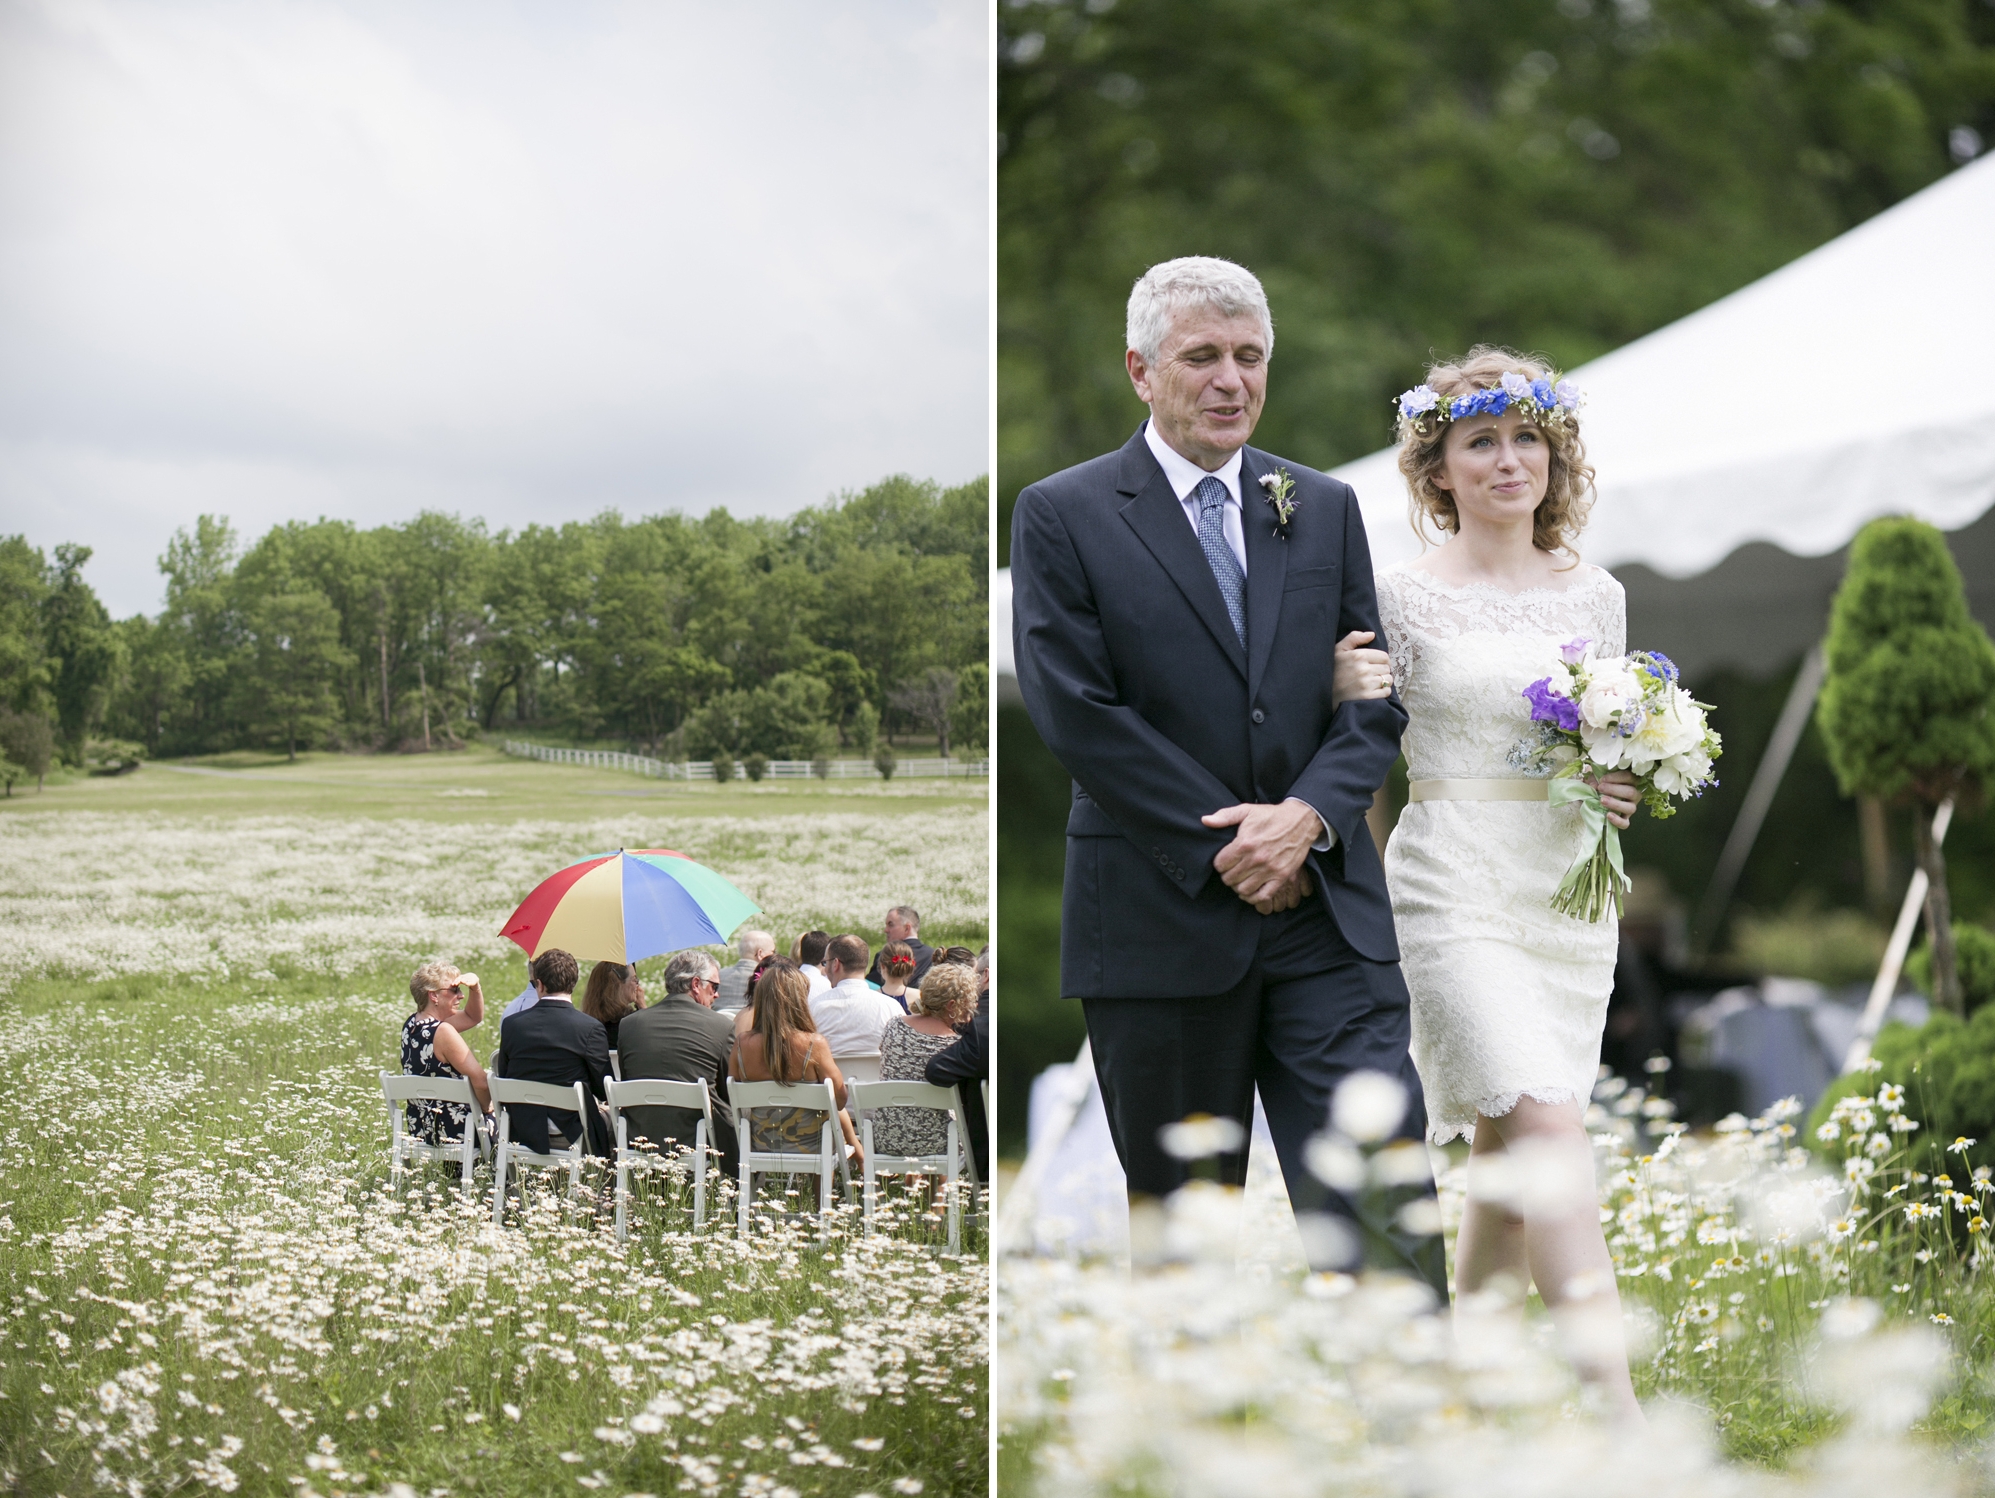 A Spring Wedding in a Meadow of Flowers From Love Me Do Photography